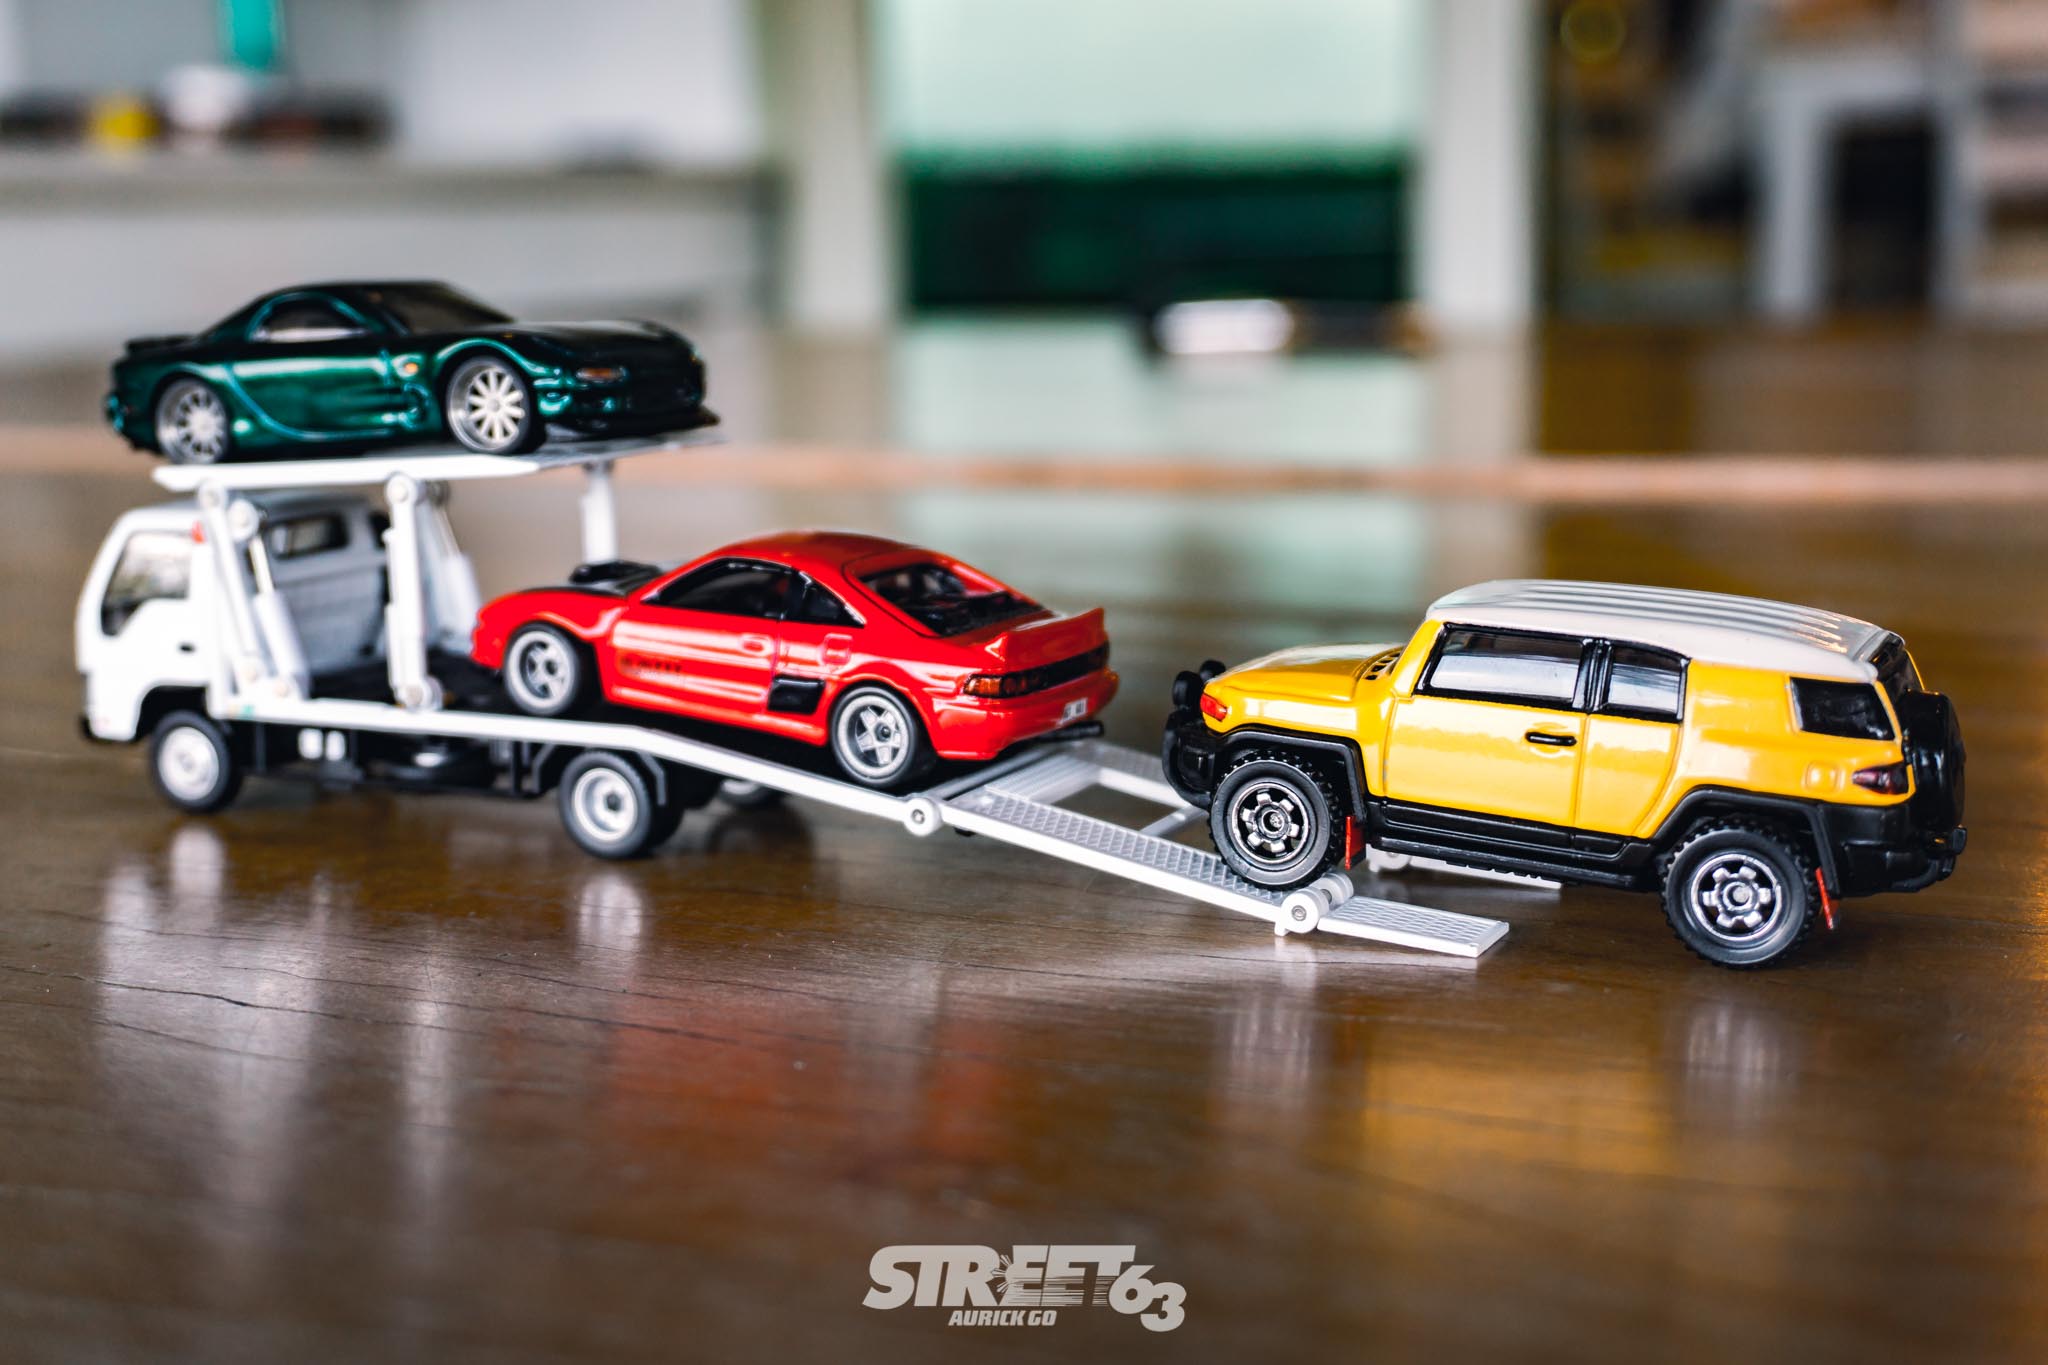 Mini63: The Street63 Diecast Collection 5